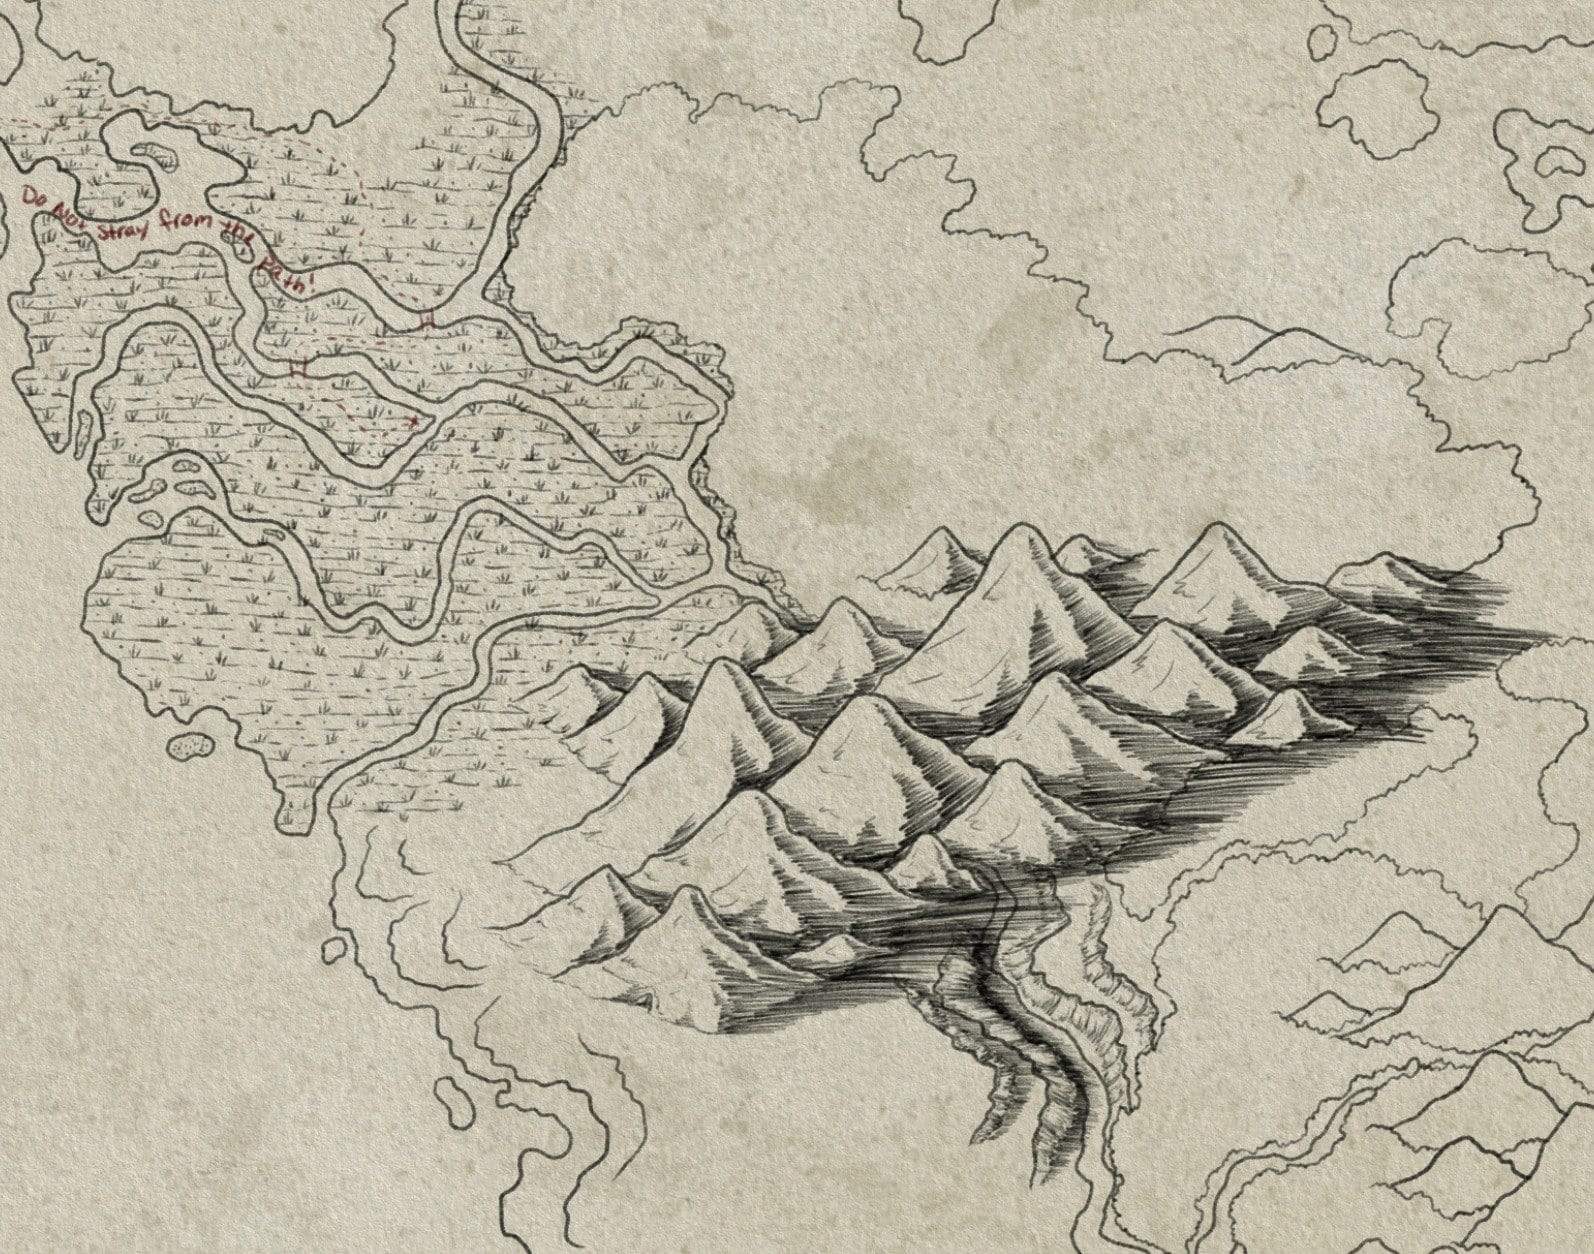 A portion of a sketched regional map by Deven Rue.